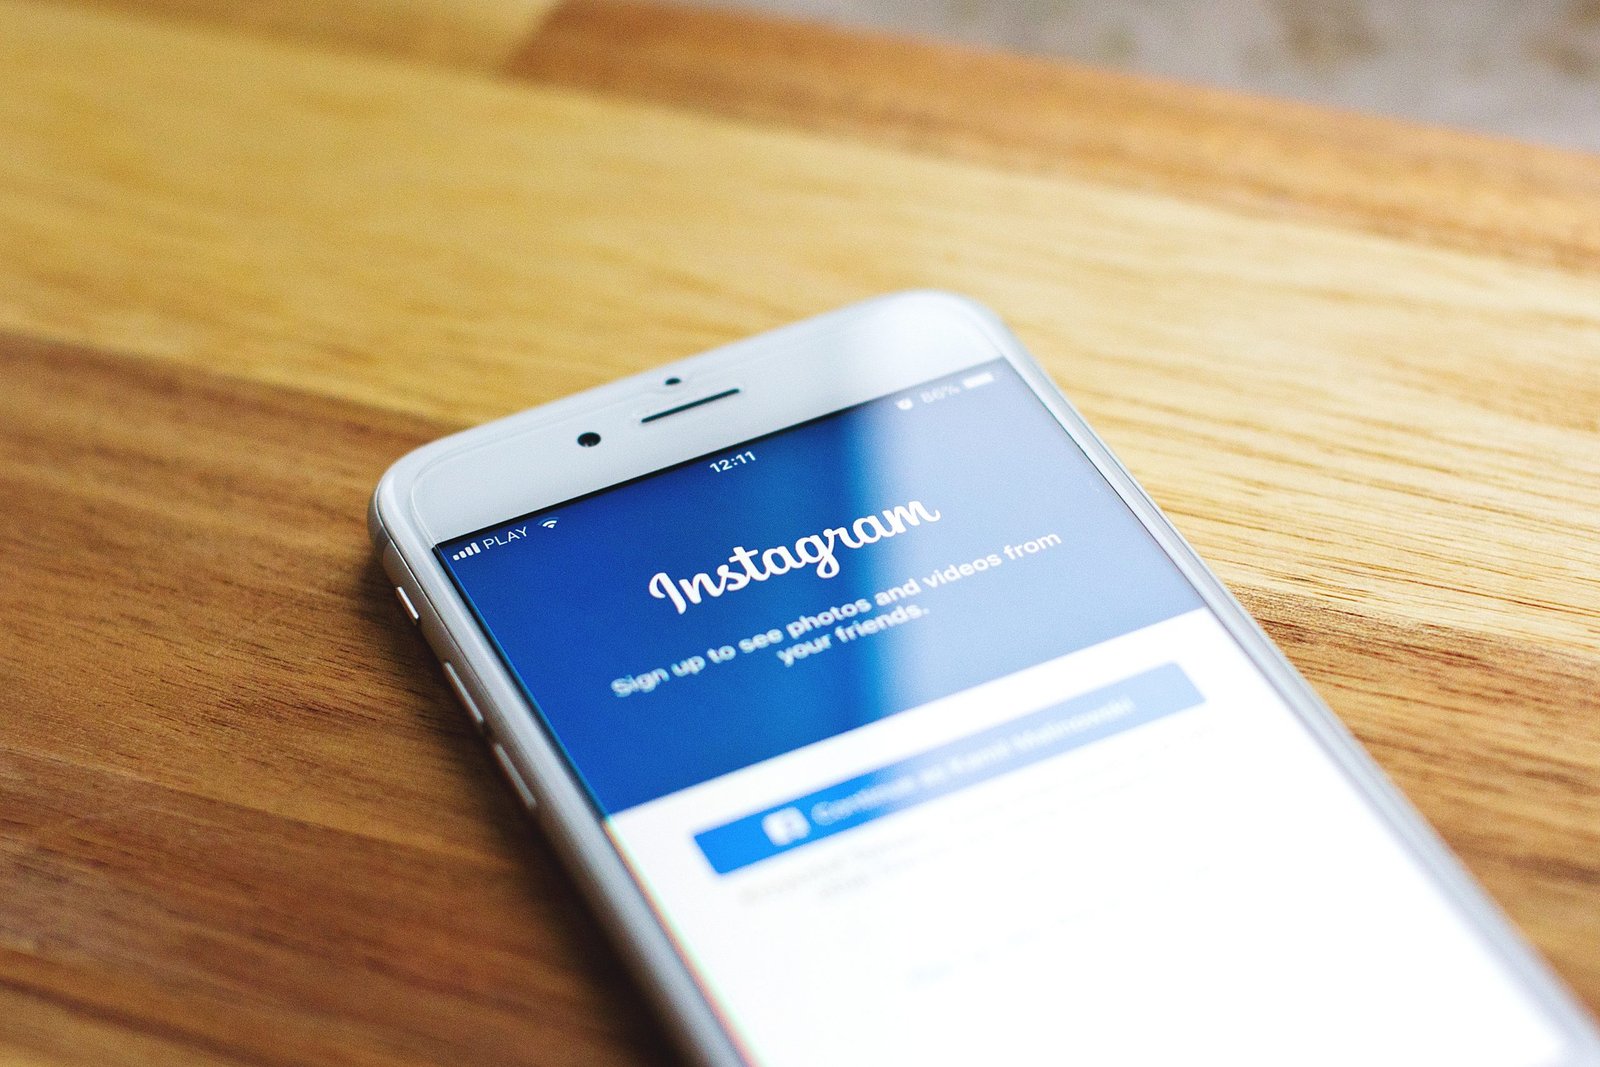 Are you looking to grow your business with Instagram? Check out these tips on how to make the most of this social media platform.